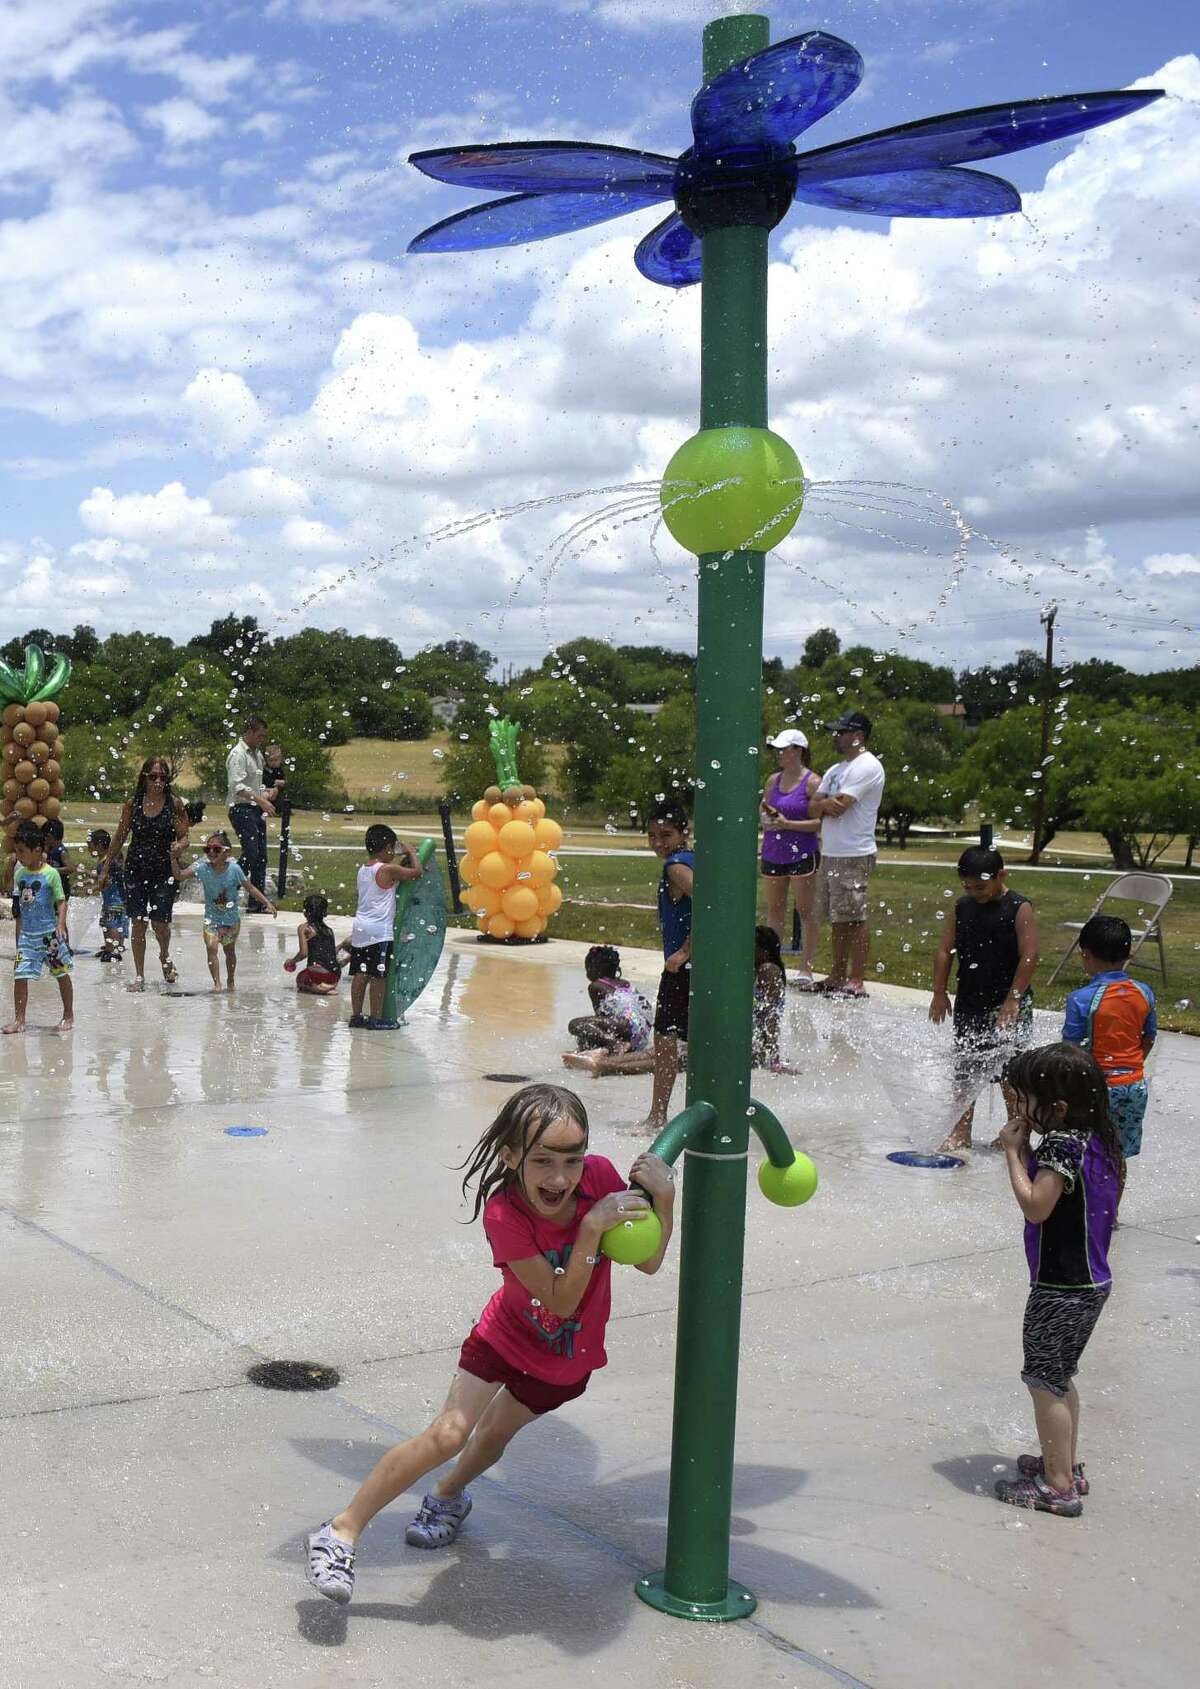 Children play on the new splash pad at Lincoln Park on San Antonio's Eastside on Saturday, June 16, 2018. H-E-B chairman and CEO Charles Butt personally donated $1 million for the redevelopment of the park to commemorate San Antonio's tricentennial. It was the first public park available to the African American community.